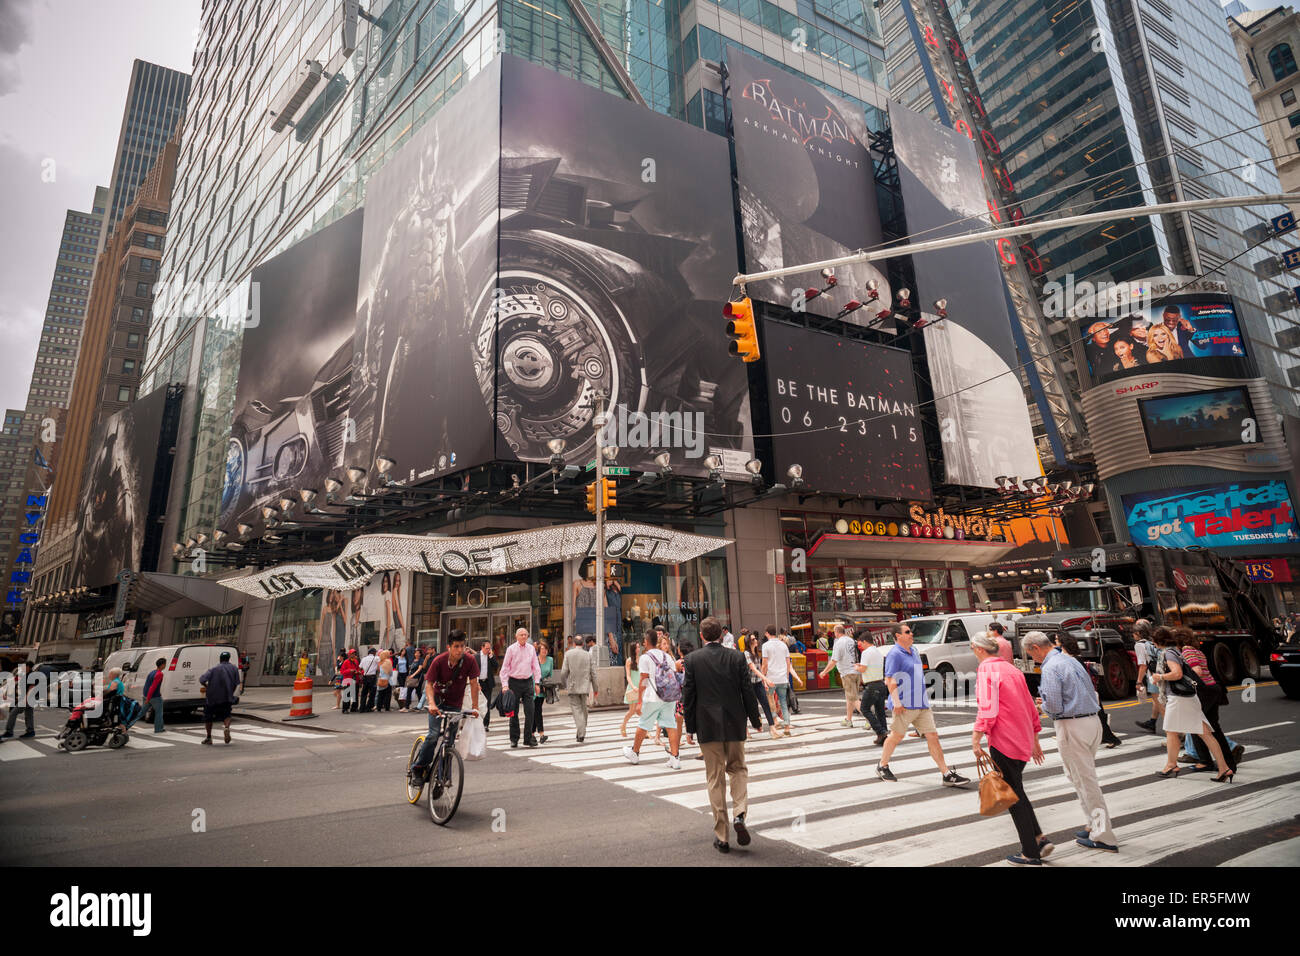 Passerby walk past advertising for RocksteadyStudio's new videogame, 'Batman: Arkham Knight ' on a billboard in Times Square in New York on Wednesday, May 27, 2015. The game, the third part of the 'Arkham' trilogy will be available on June 23. (© Richard B. Levine) Stock Photo